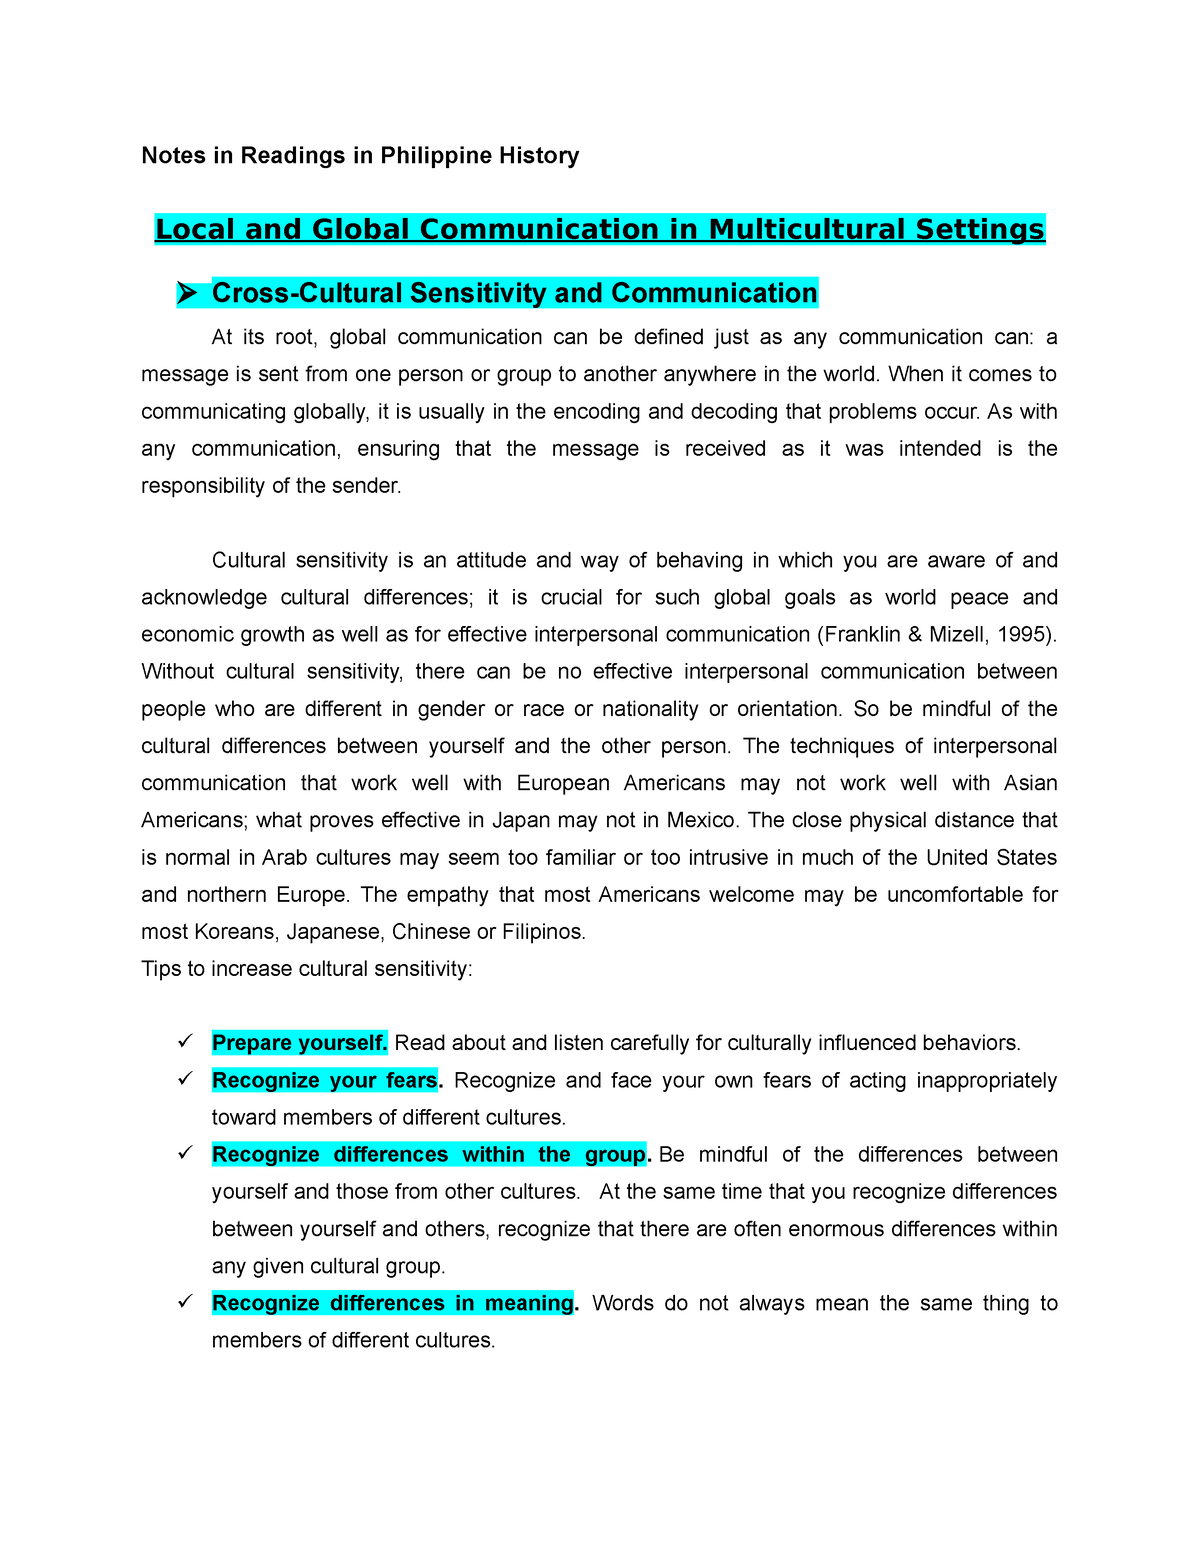 essay about local and global communication in multicultural settings